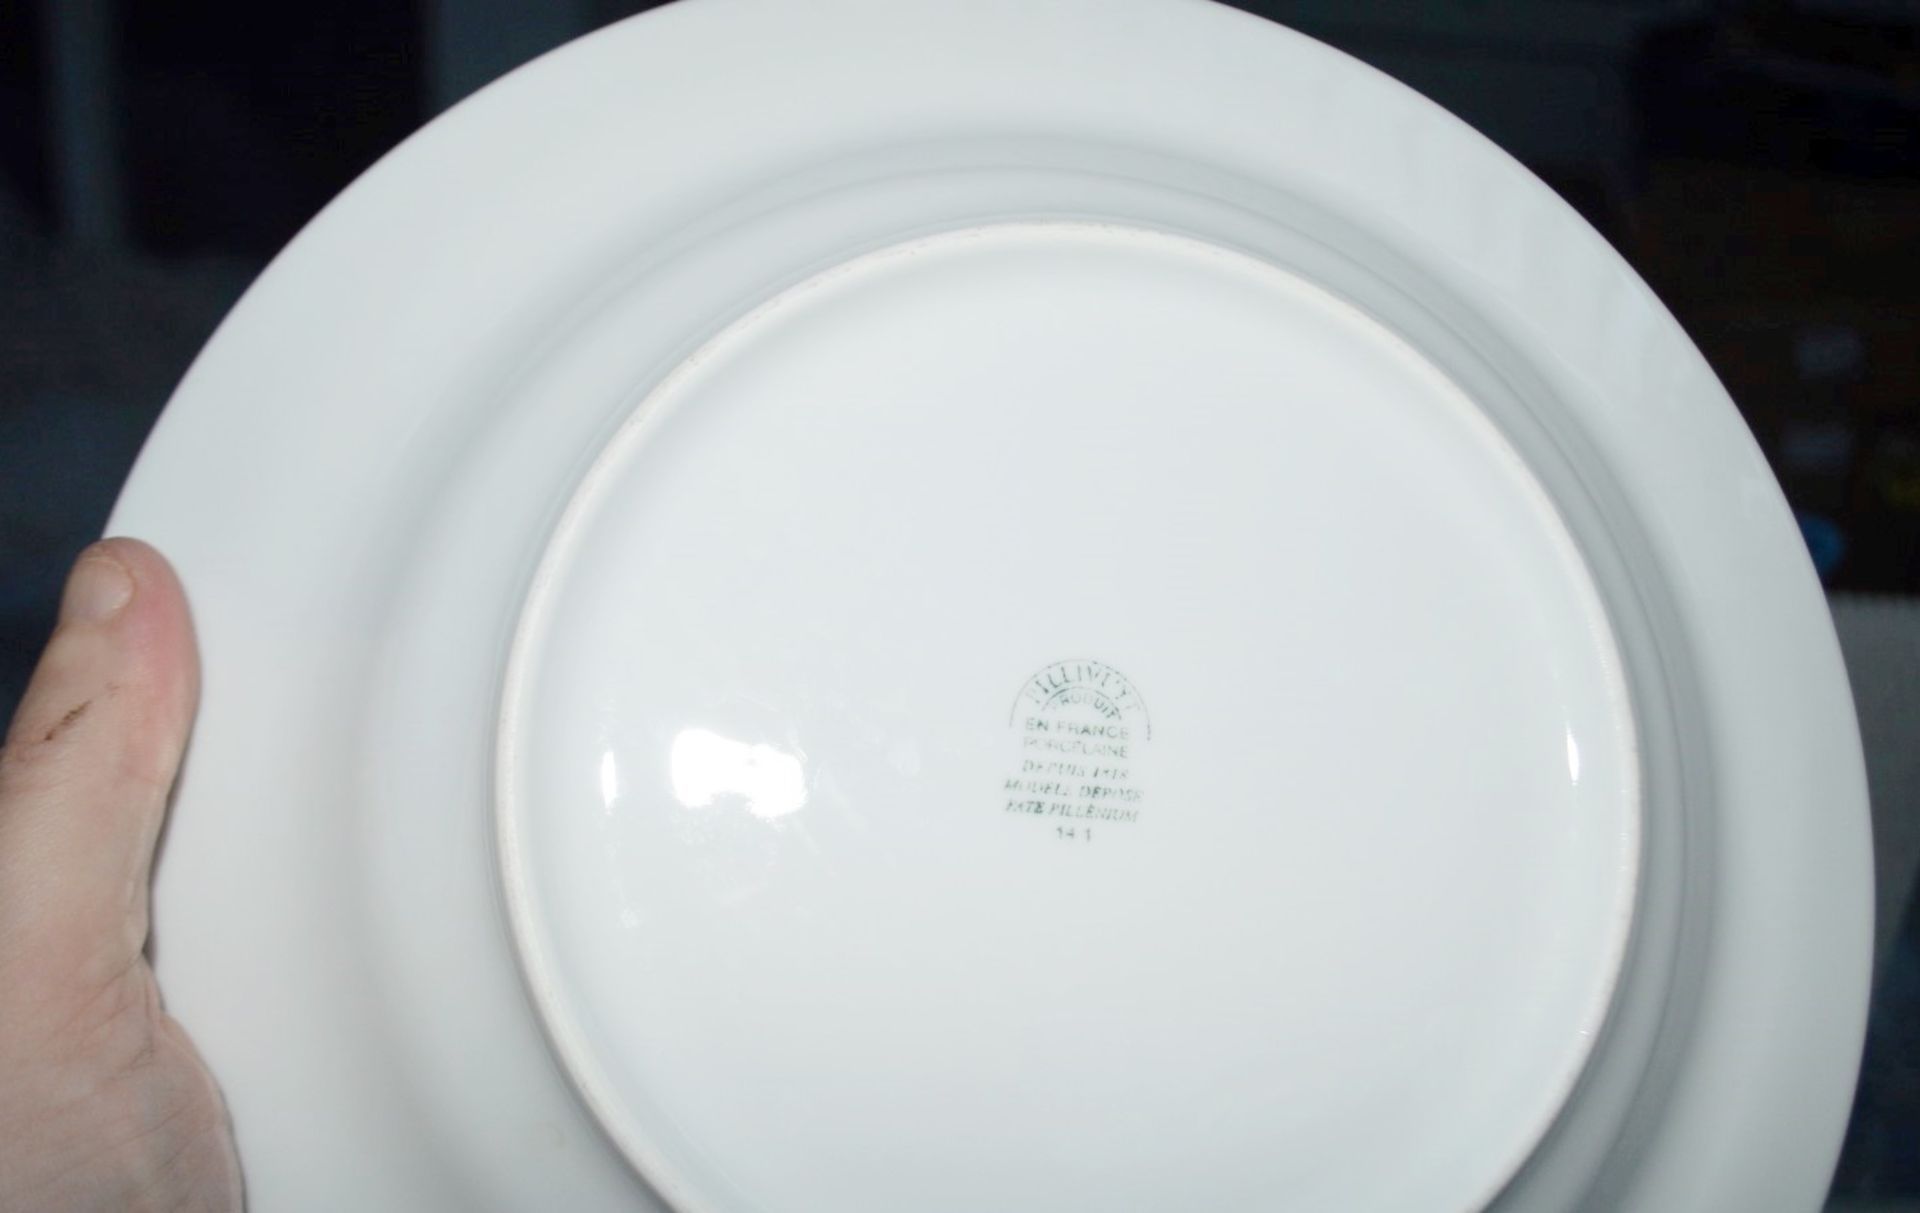 32 x PILLIVUYT Porcelain Pasta / Soup Plates In White Featuring 'Famous Branding' In Gold - - Image 4 of 6